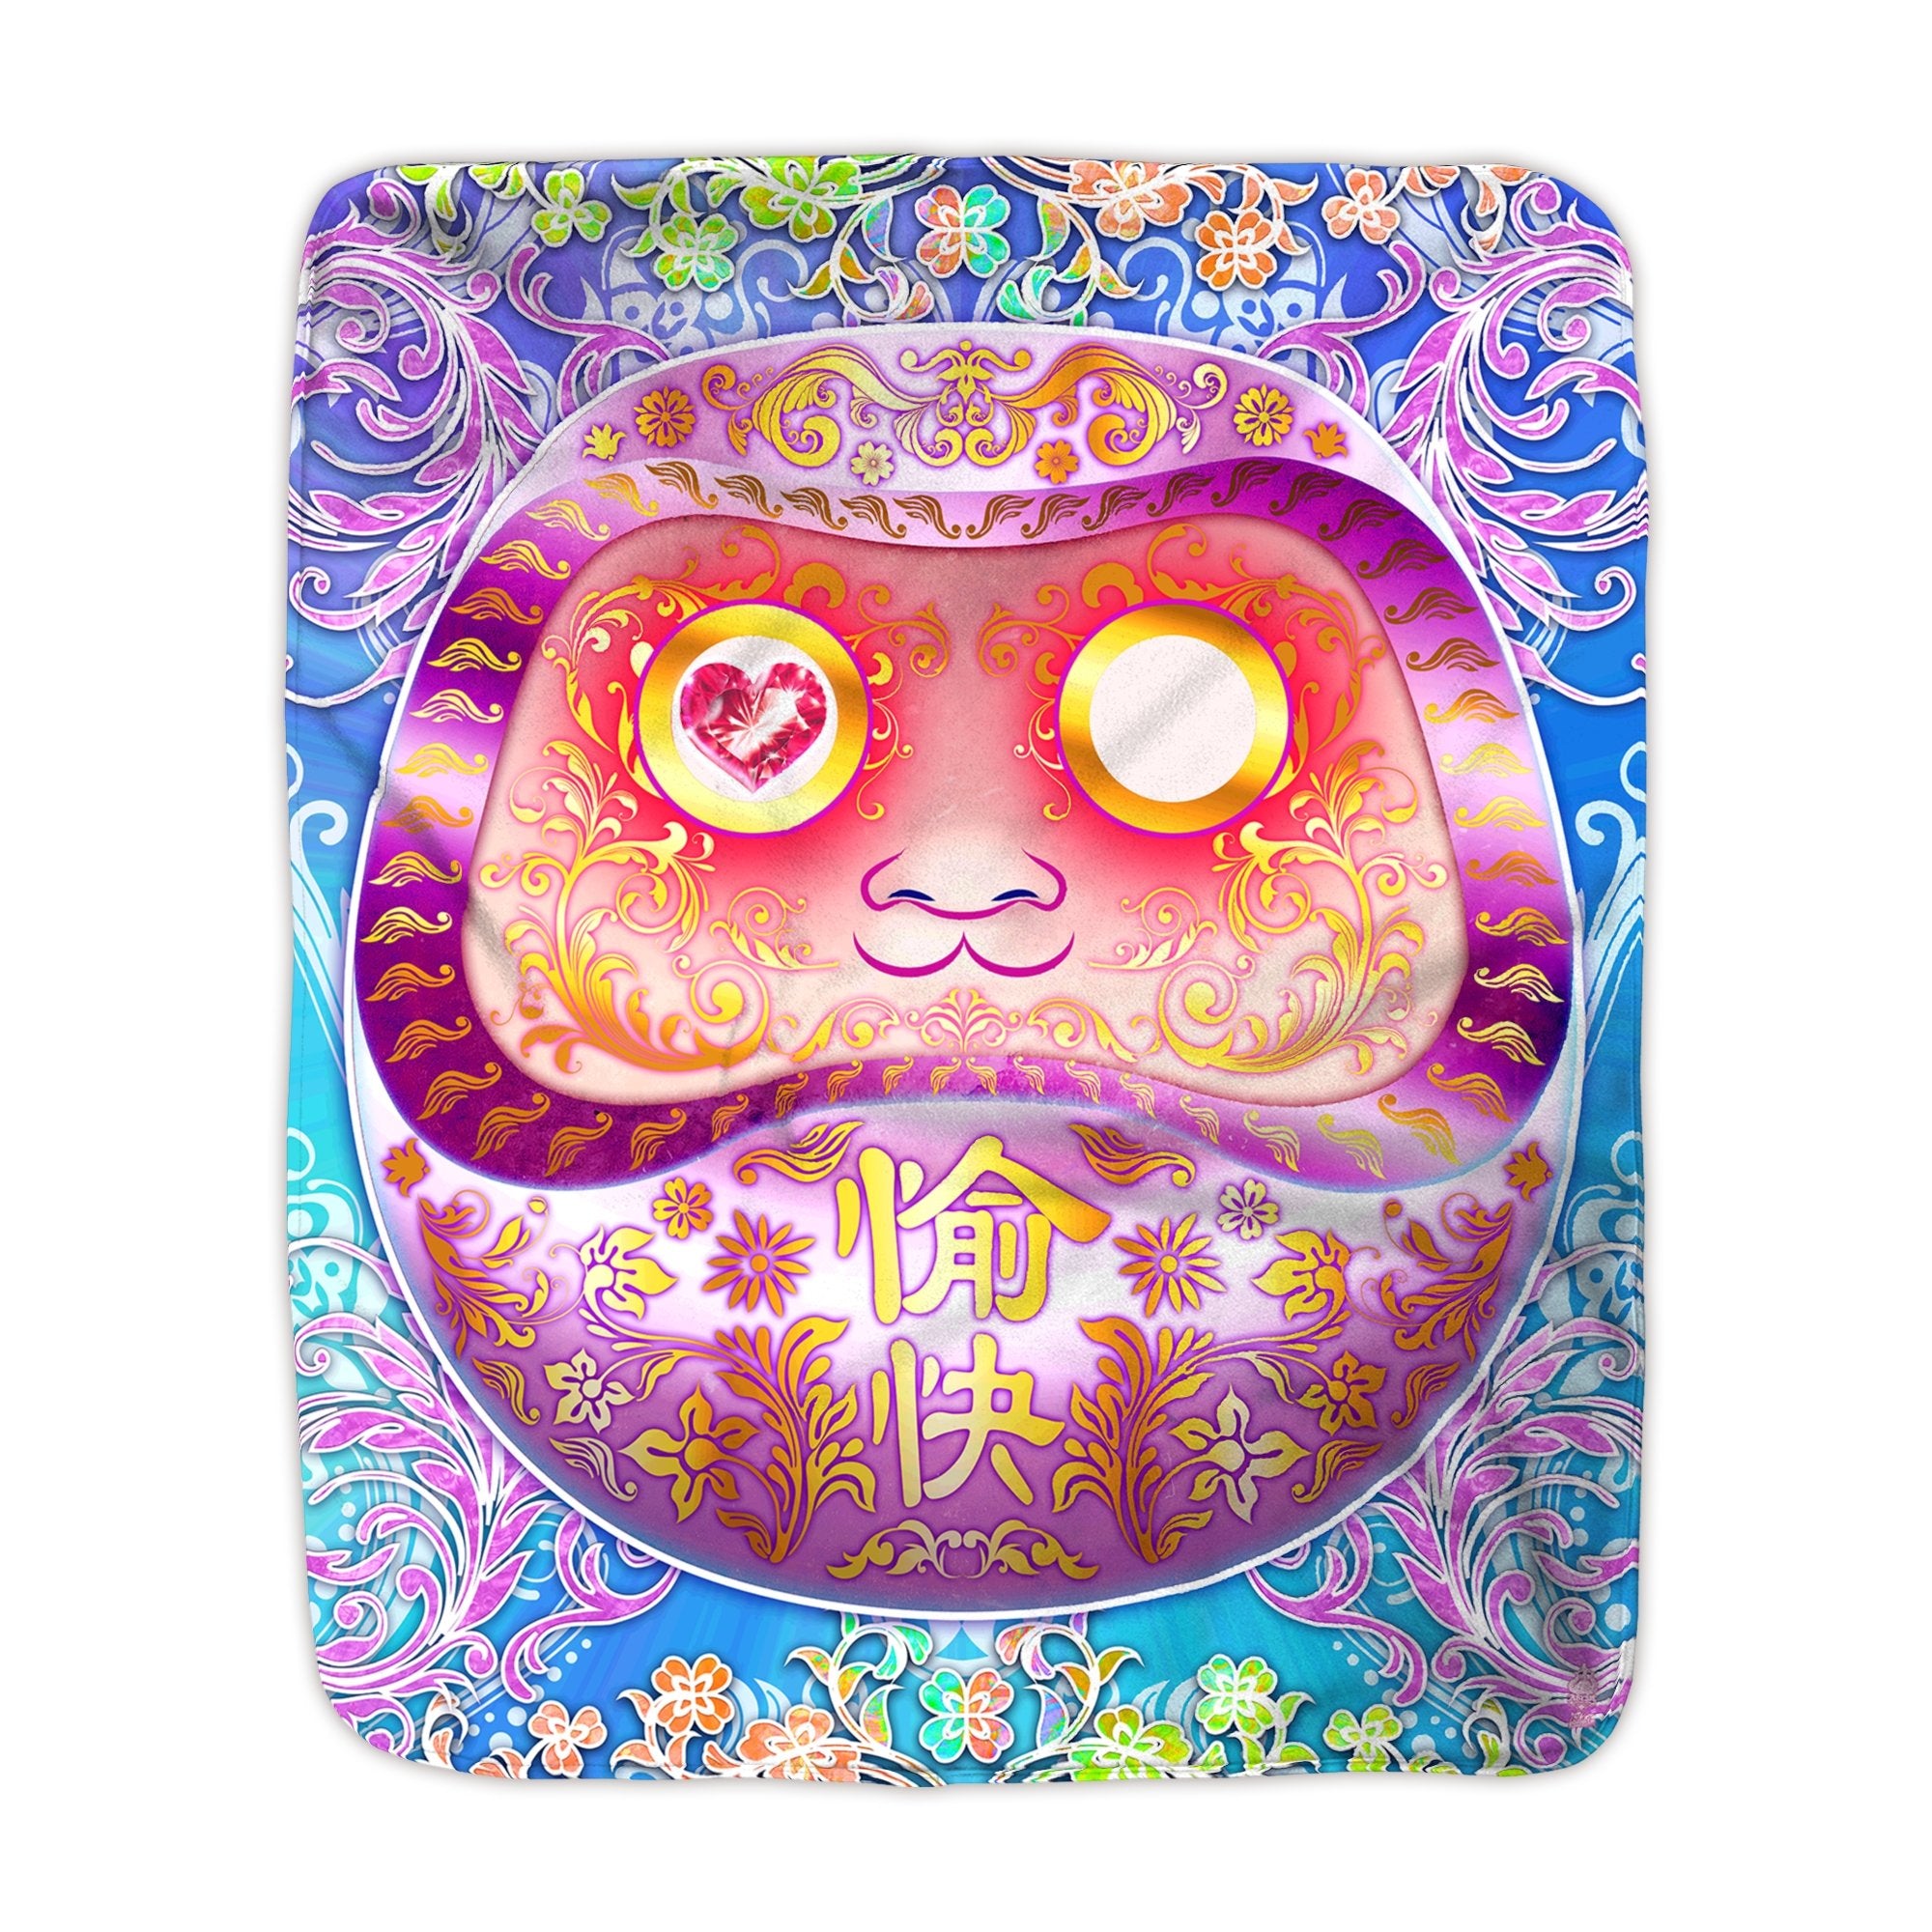 Kawaii Throw Fleece Blanket, Japanese Anime and Manga, Ecclectic Decor, Eclectic and Funky Gift - Psy Holographic Daruma - Abysm Internal